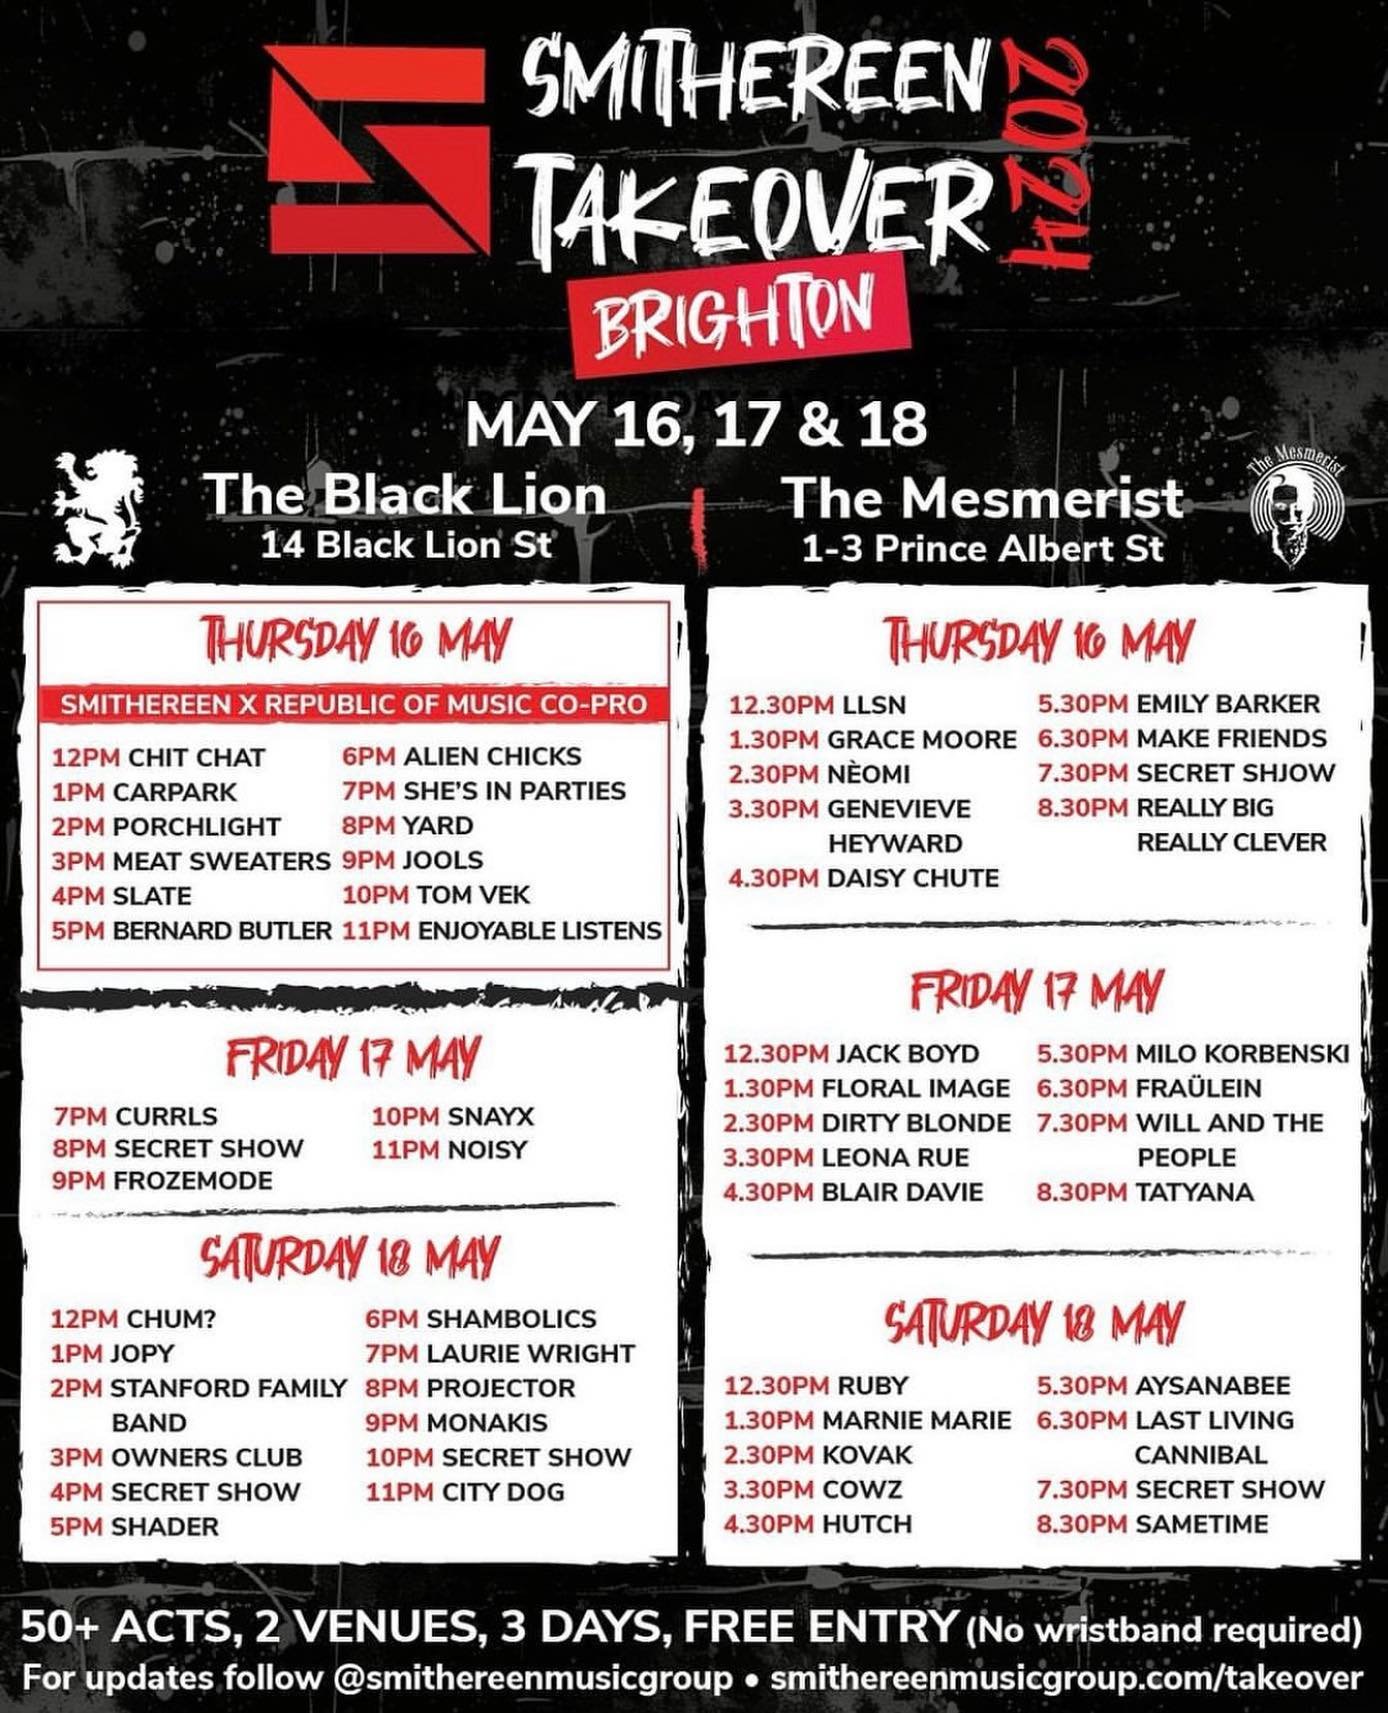 1 WEEK TO GO‼️

We&rsquo;re counting down the days until the Smithereen takeover. 3 days of live music. All day. All genres. 

With over 50 acts and FREE ENTRY, there&rsquo;s no where else you should be spending next weekend! 🎸

#smithereentakeover 